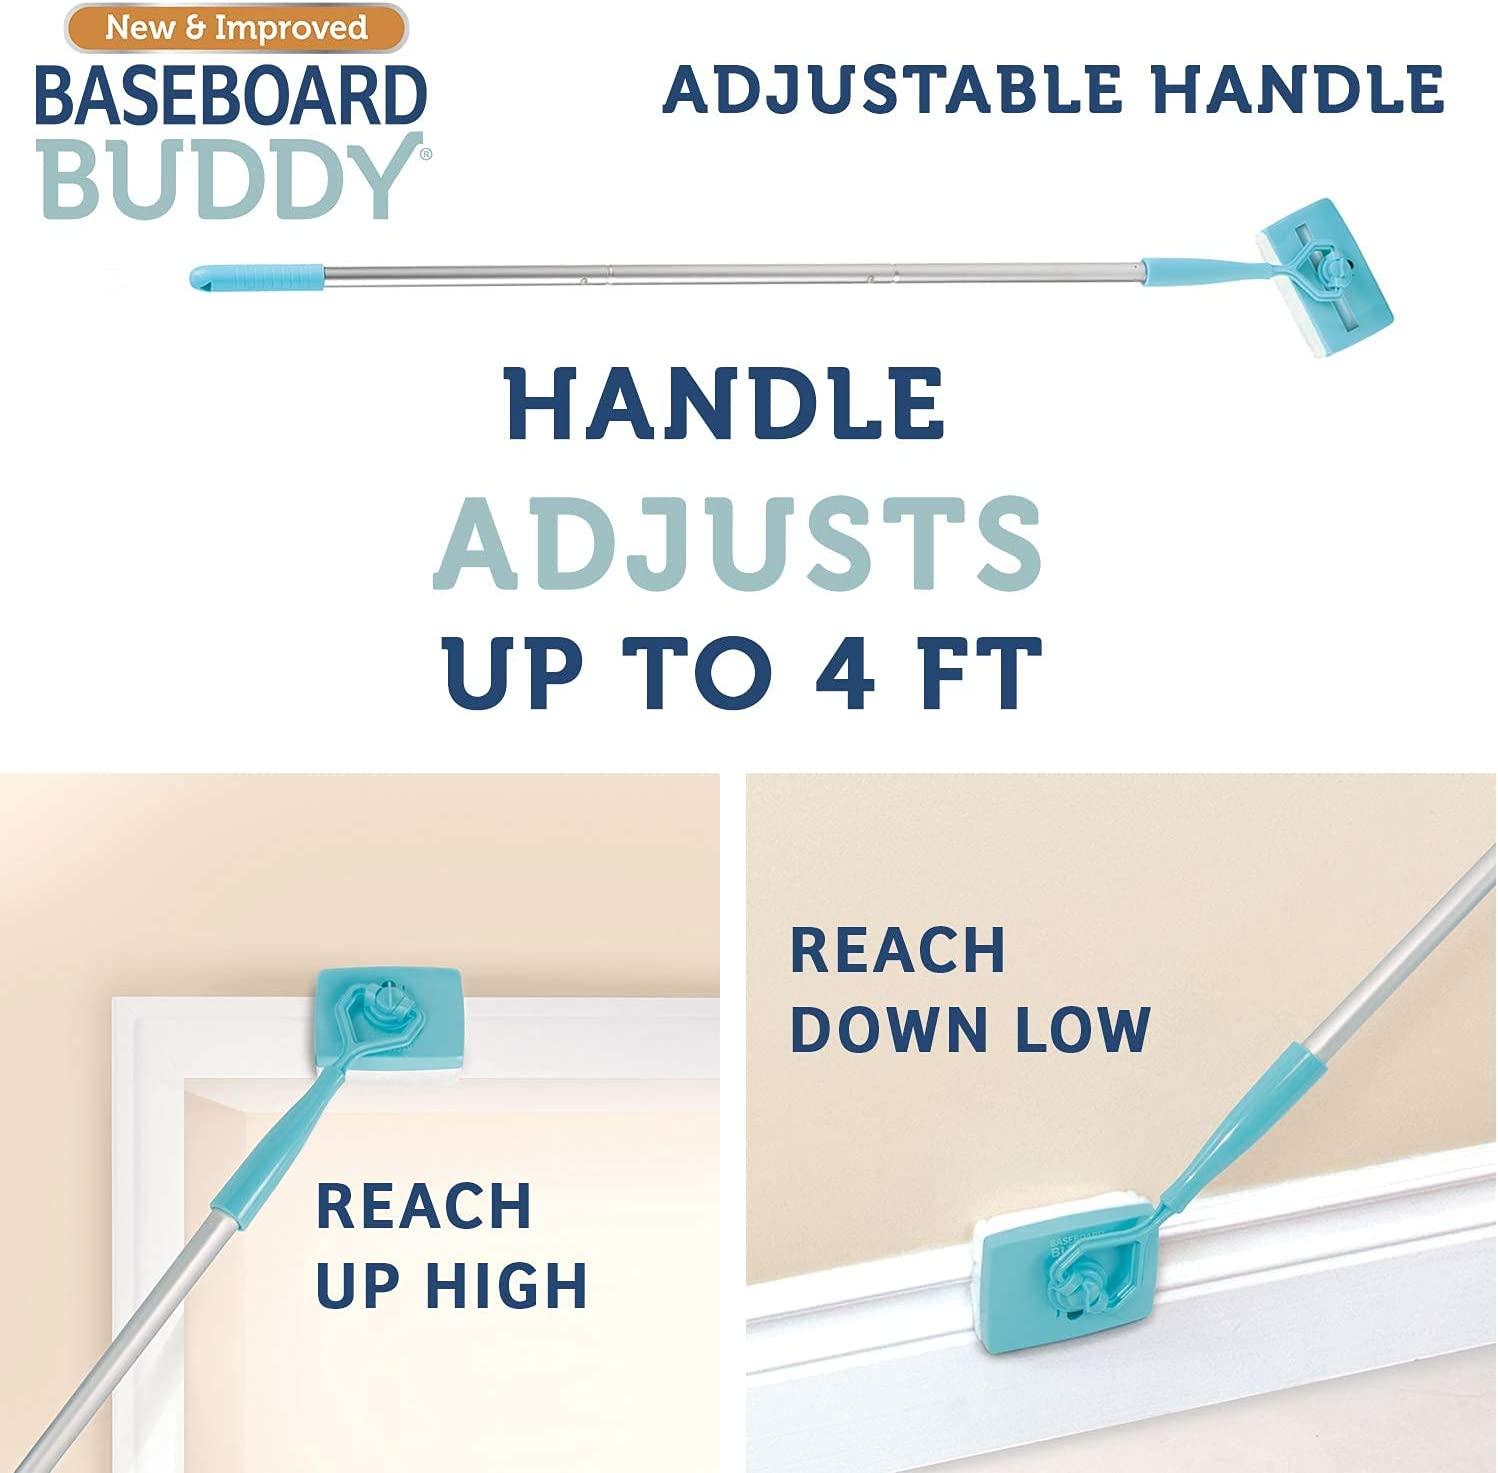 Baseboard Cleaner: Cleaning Has Never Been Easier With These Tools